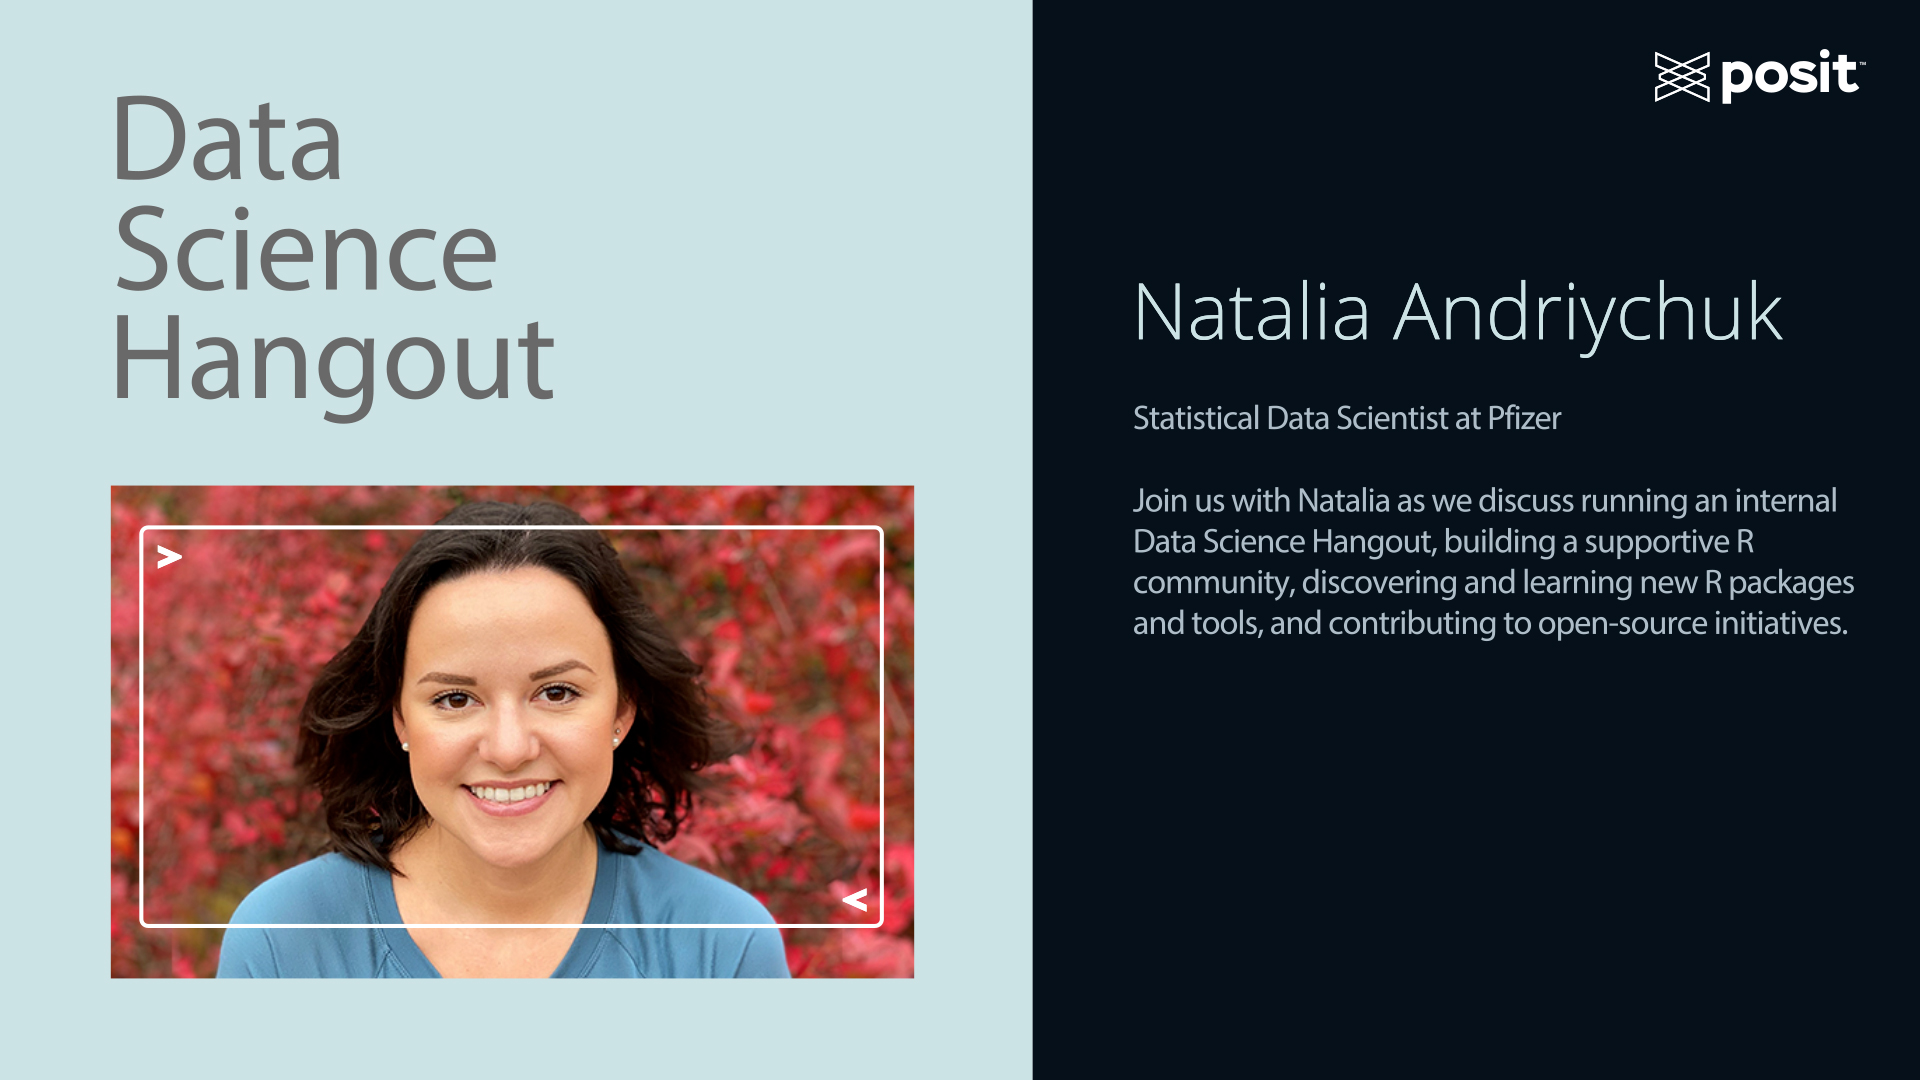 Text: Data Science Hangout, Natalia Andriychuck, Statistical Data Scientist at Pfizer.  Join us with Natalia as we discuss running an internal Data Science Hangout, building a supporting R community, and discovering and learning new R packages and tools, and contributing to open-source initiatives.